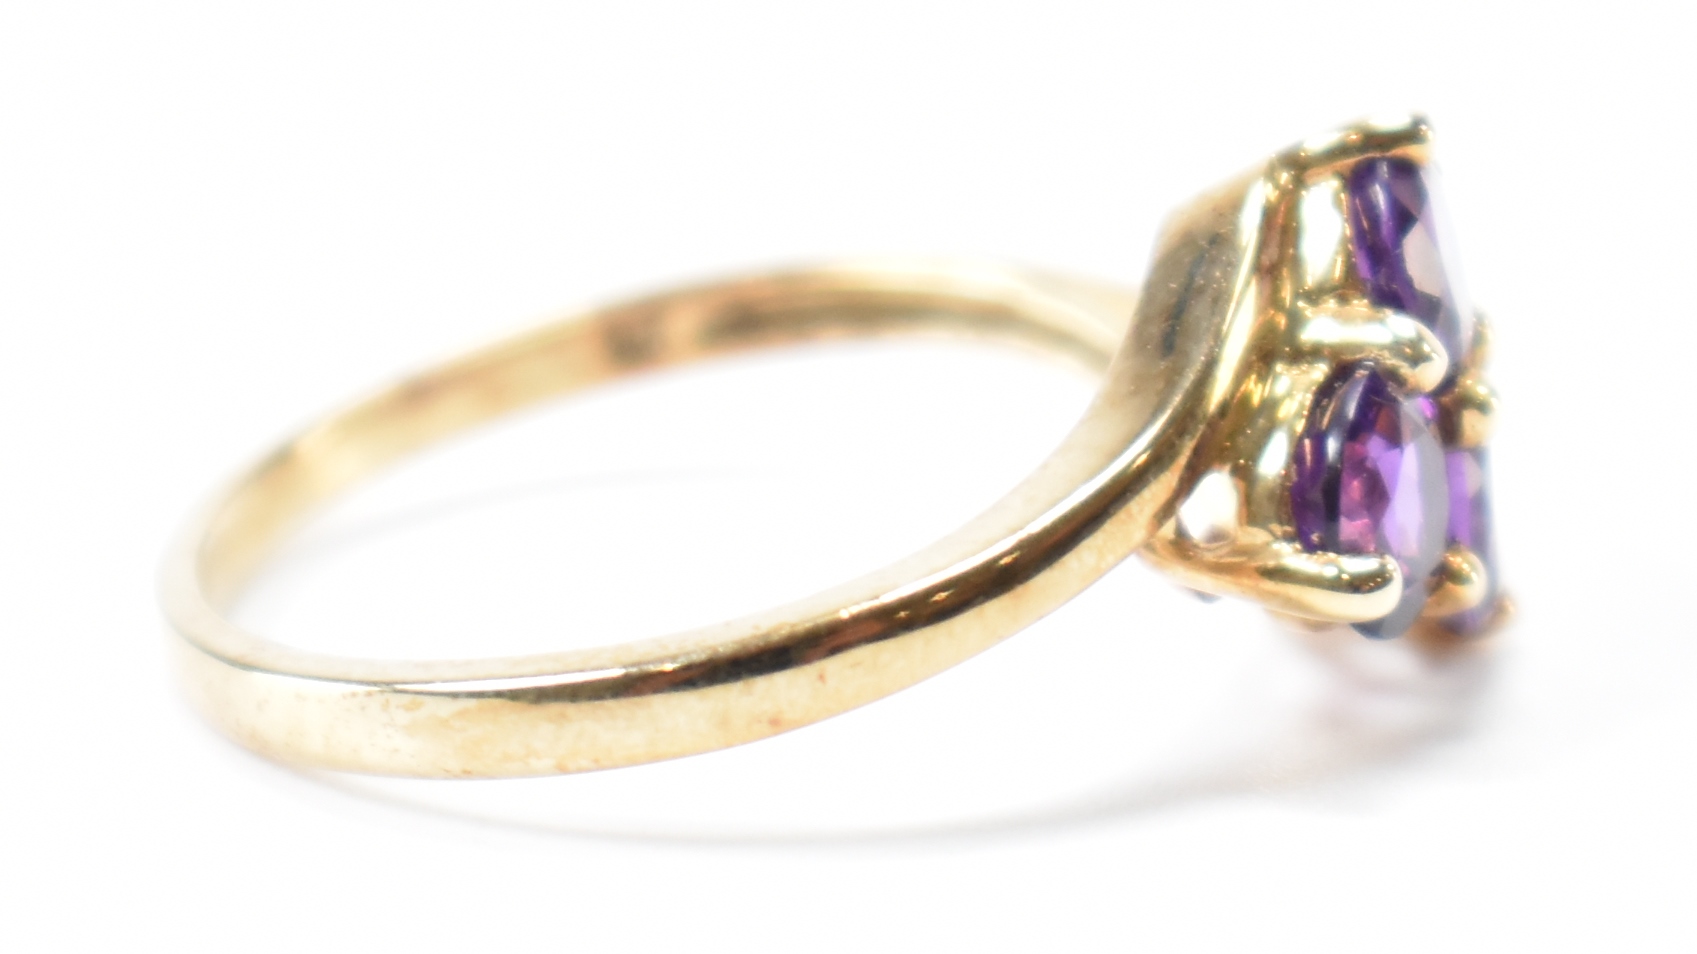 HALLMARKED 9CT GOLD & PURPLE STONE CROSSOVER RING - Image 5 of 8